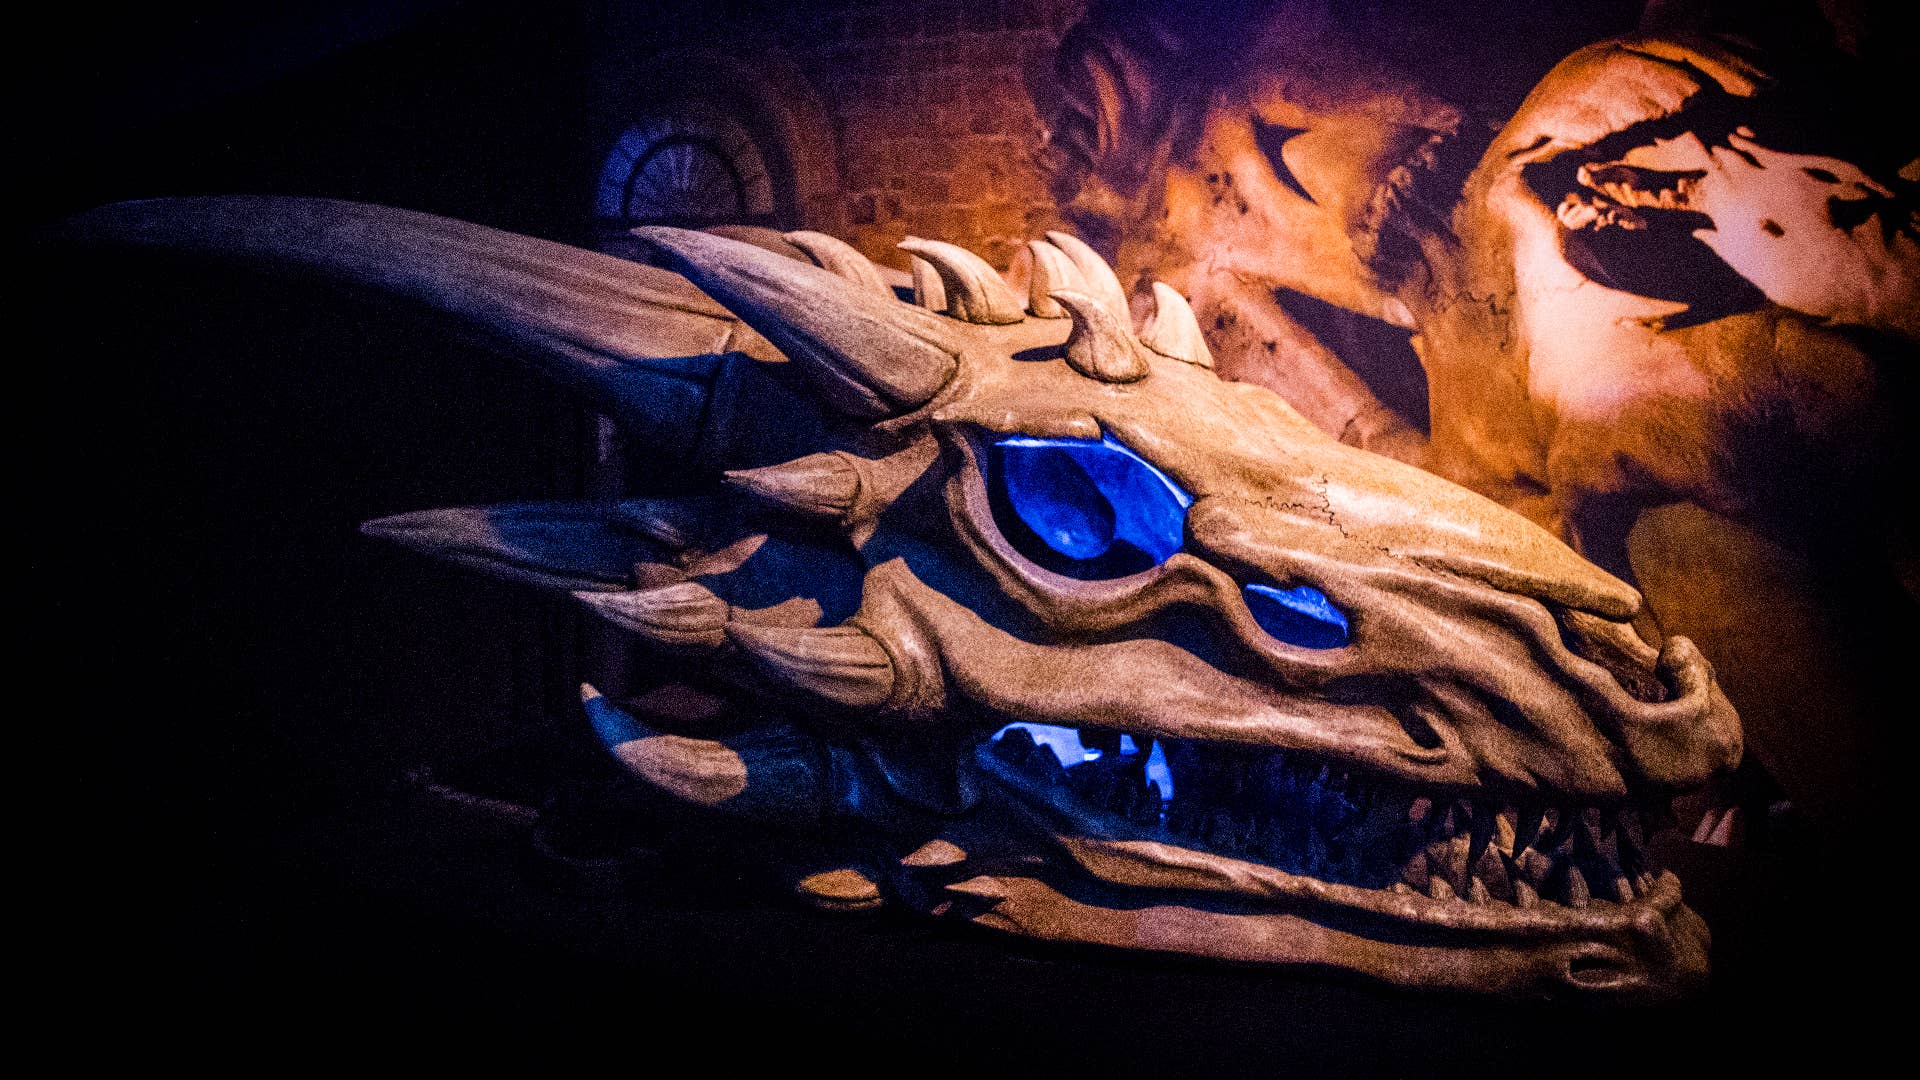 Dragon skull from Game of Thrones touring exhibition.